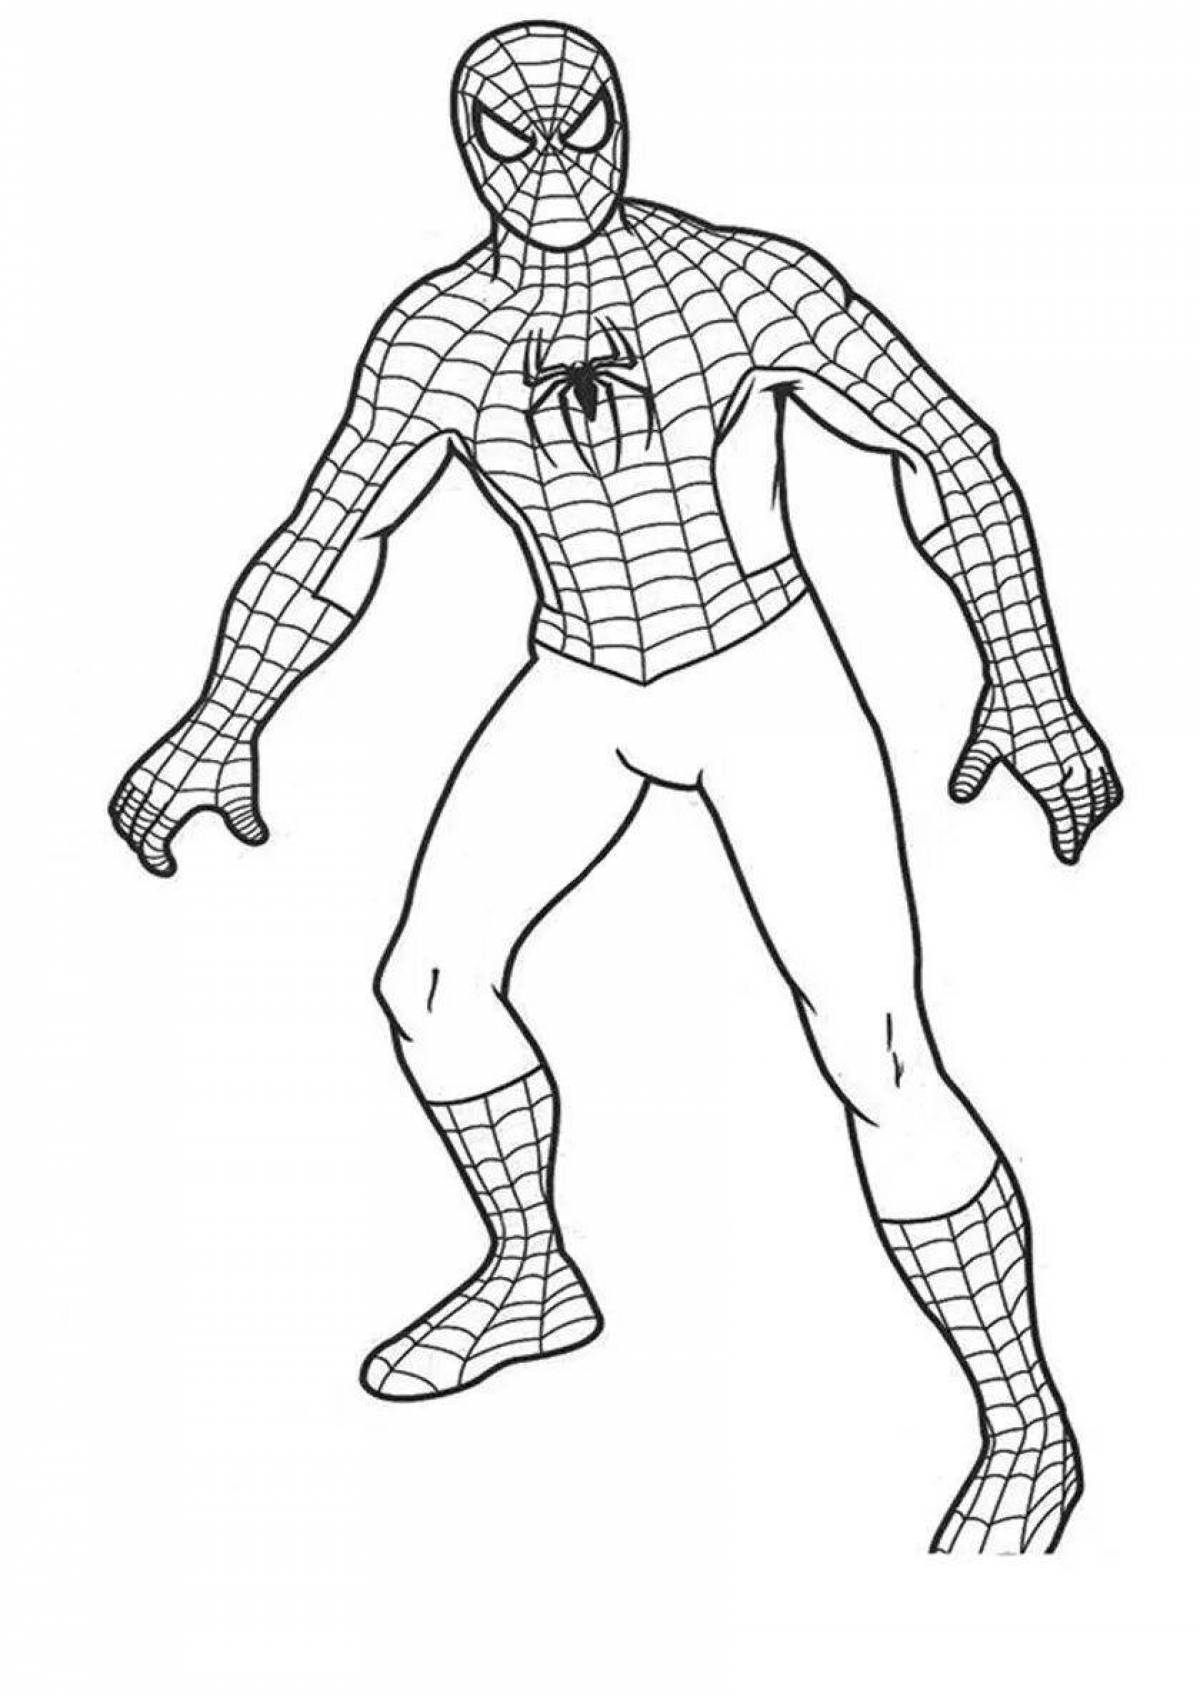 Coloring page energetic spider-man